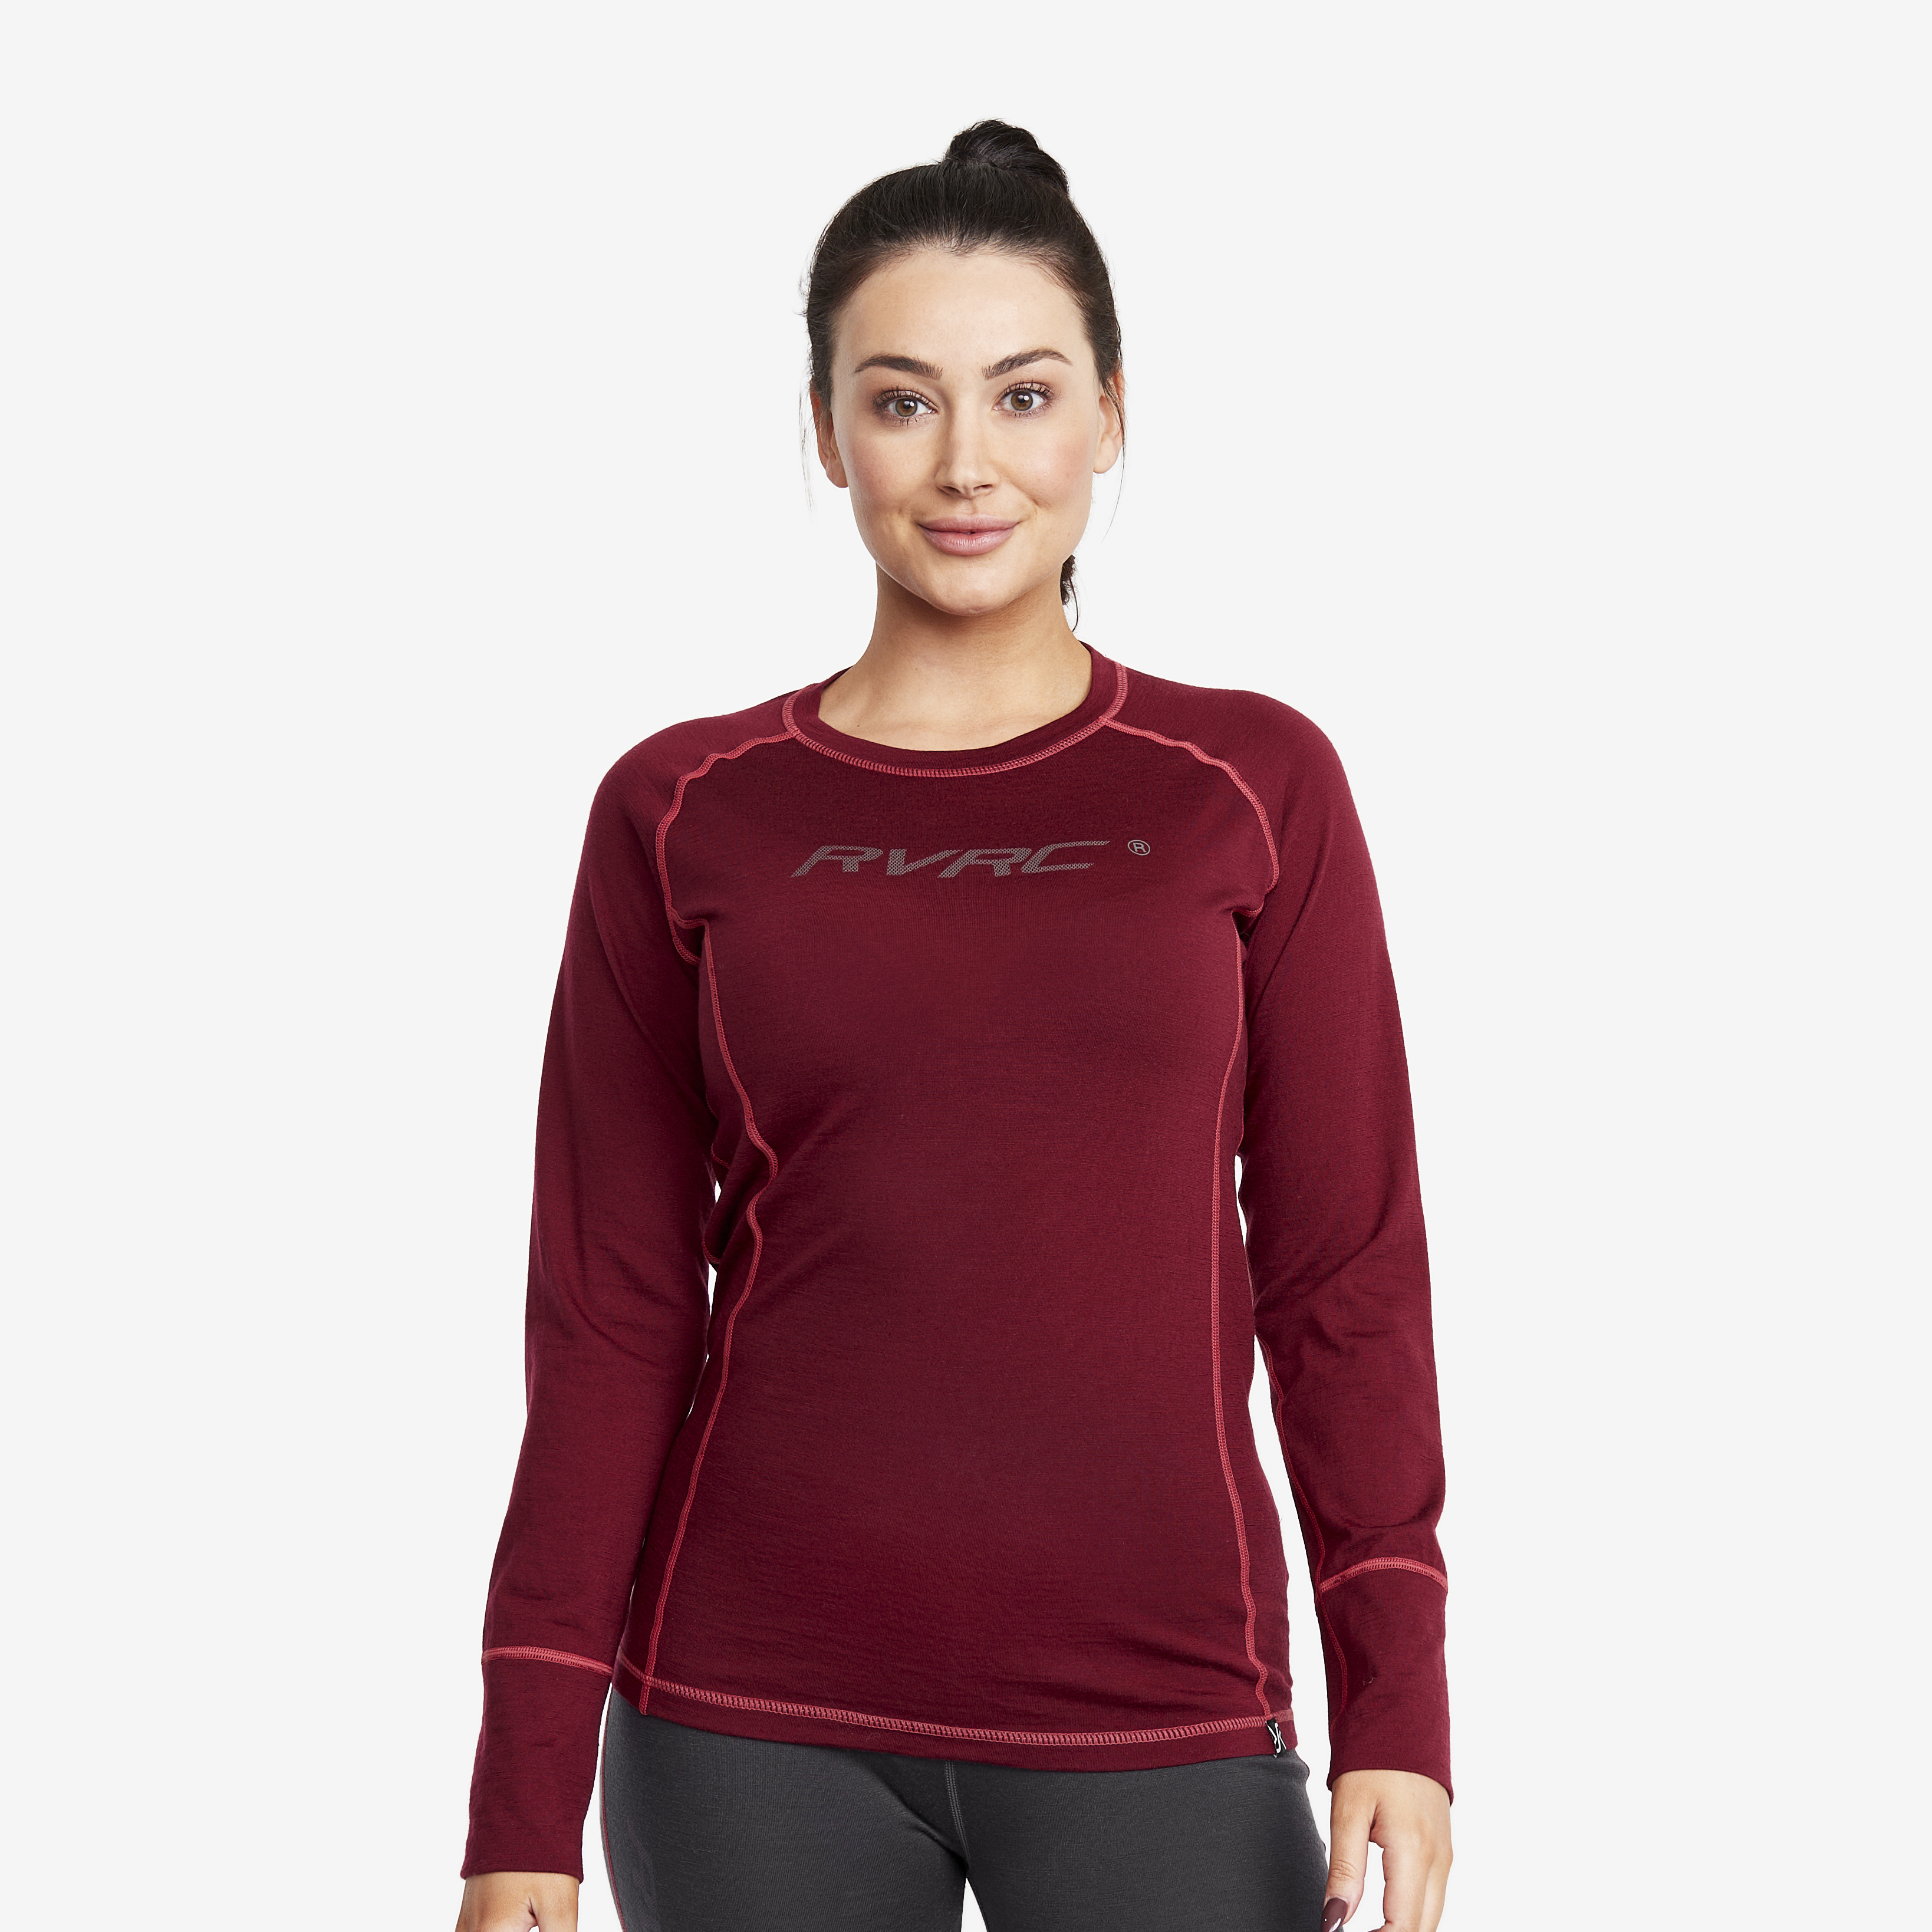 Outright Merino Top Bison Red/Anthracite Dam